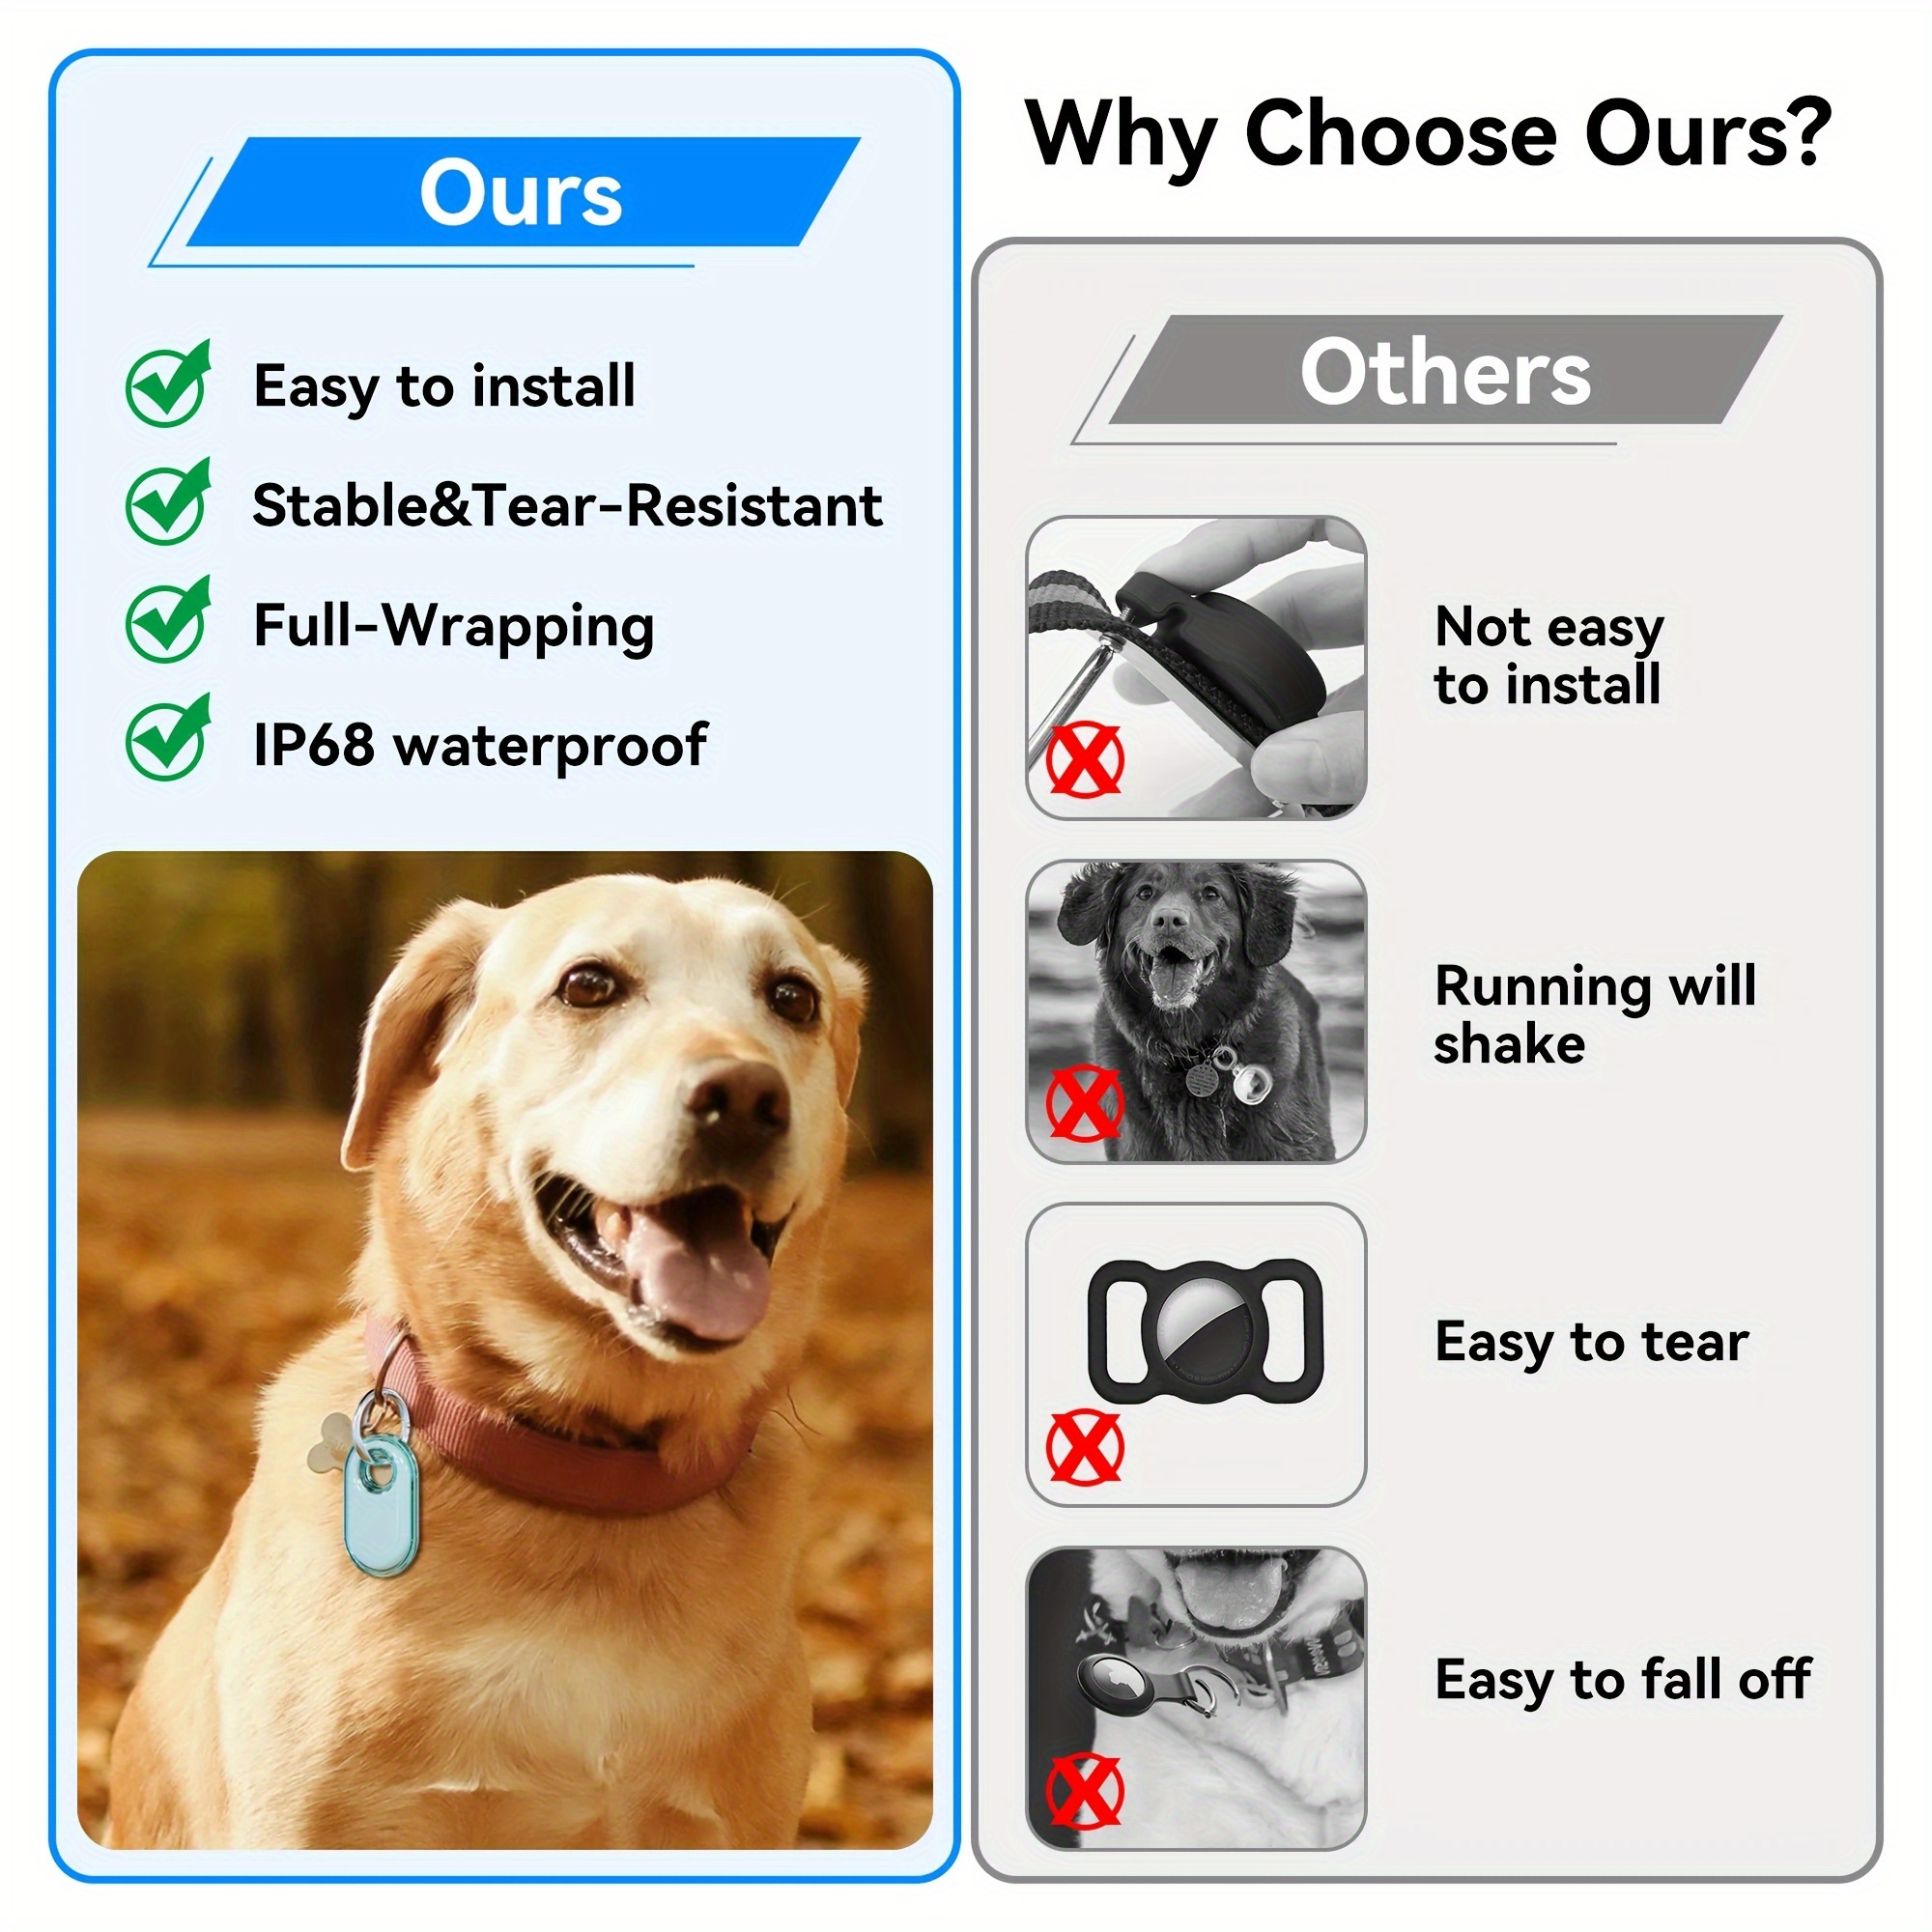 Waterproof Protective Case For Smart Tag 2 Pet Collars - Temu